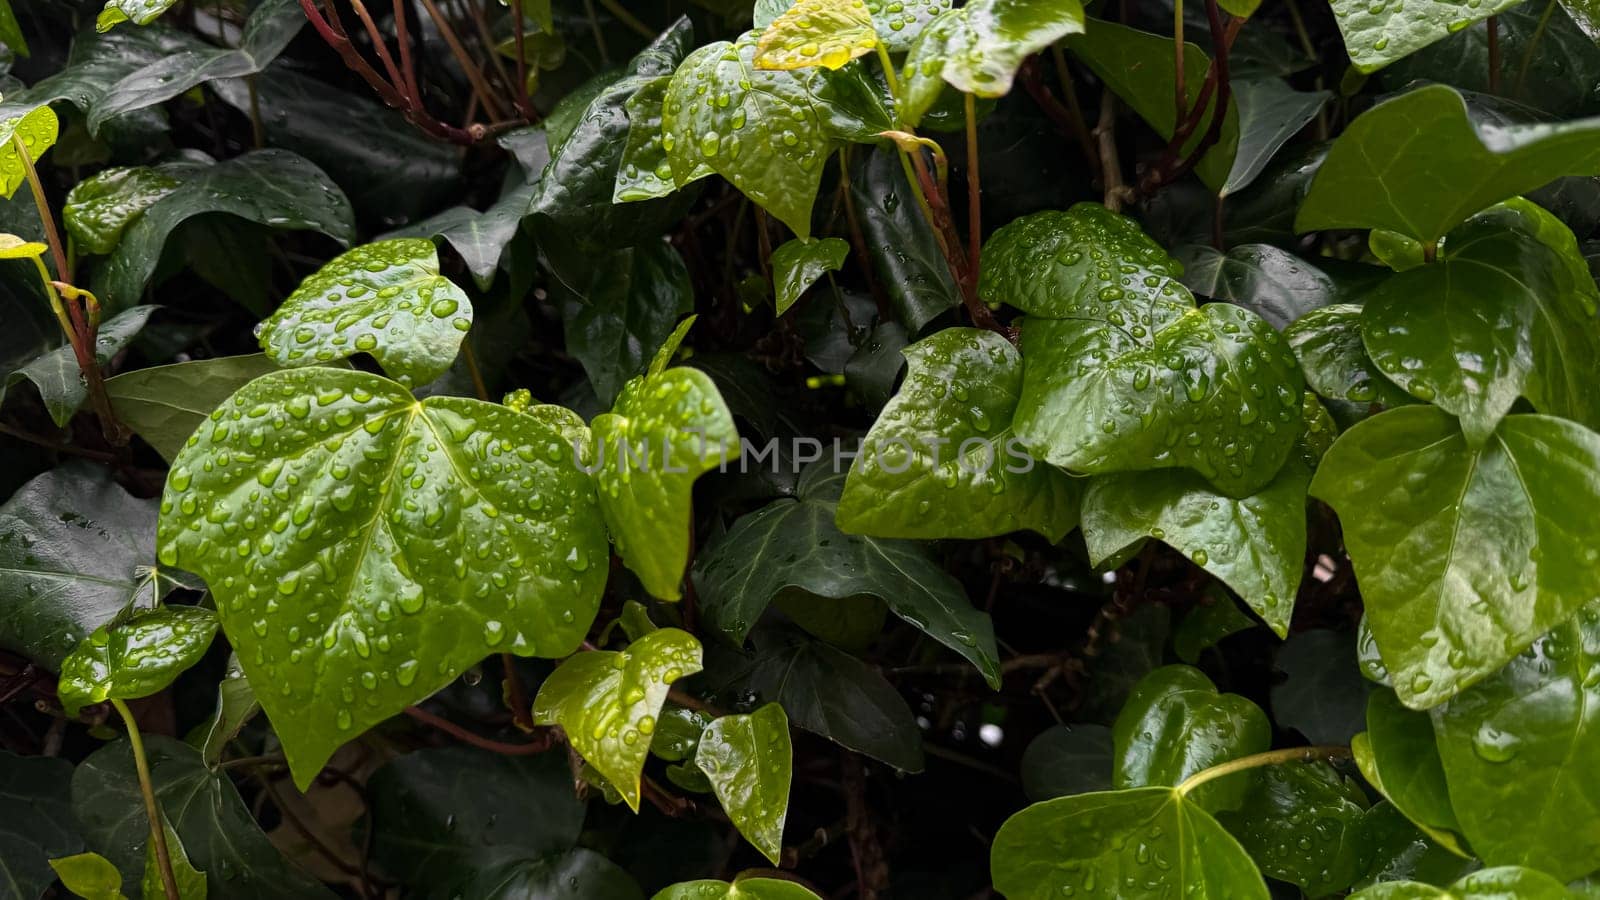 Wet green leaves with raindrops, close up on ivy plant. Nature background. Freshness concept for design and print. Macro shot with copy space. by Lunnica